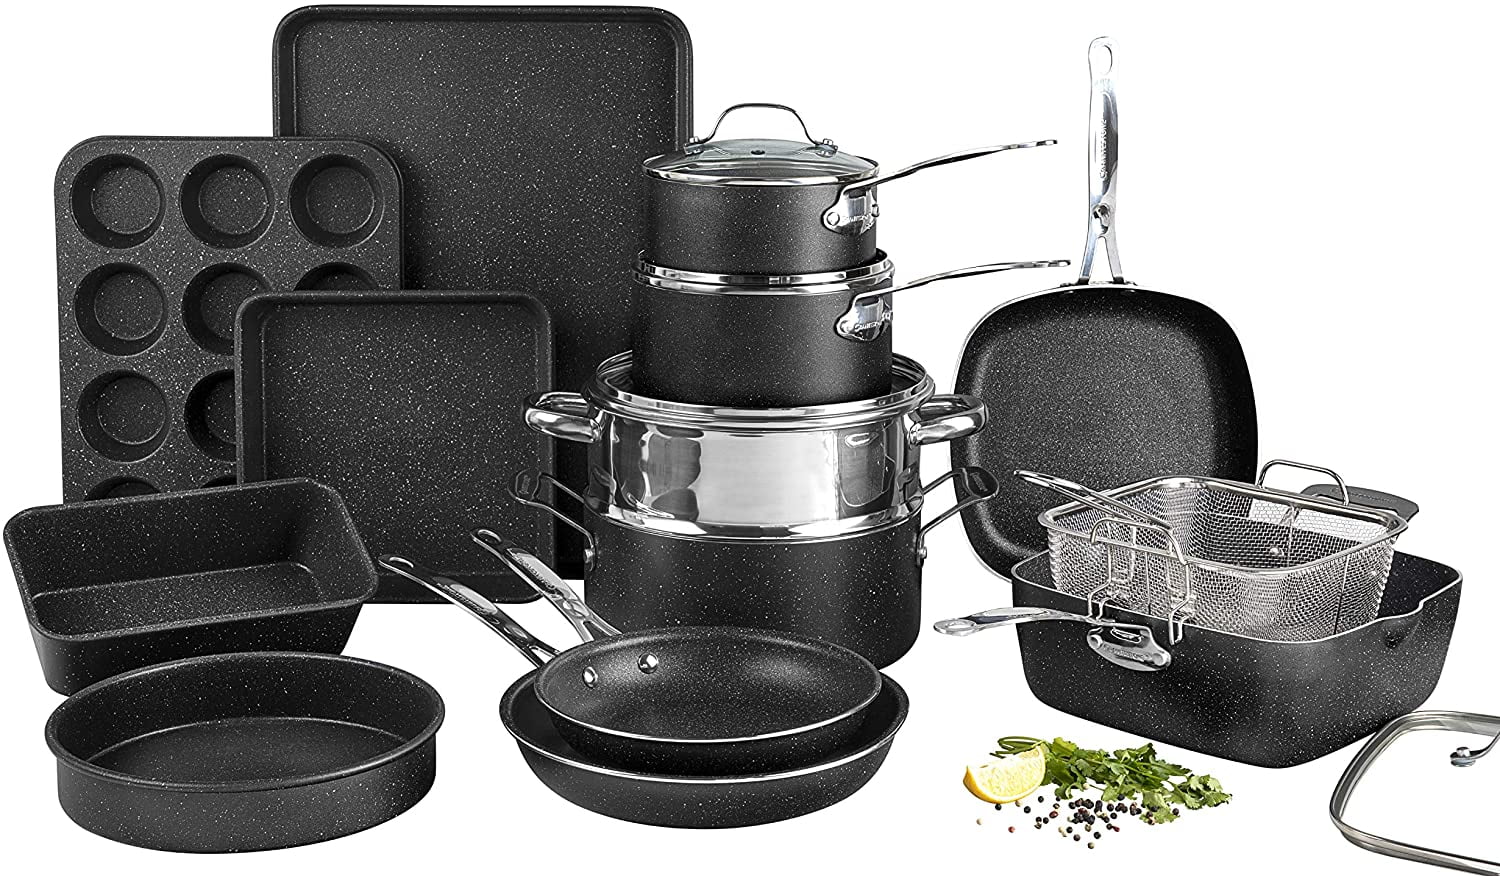 Granite Stone Pots and Pans Set, 20 Piece Complete Cookware + 